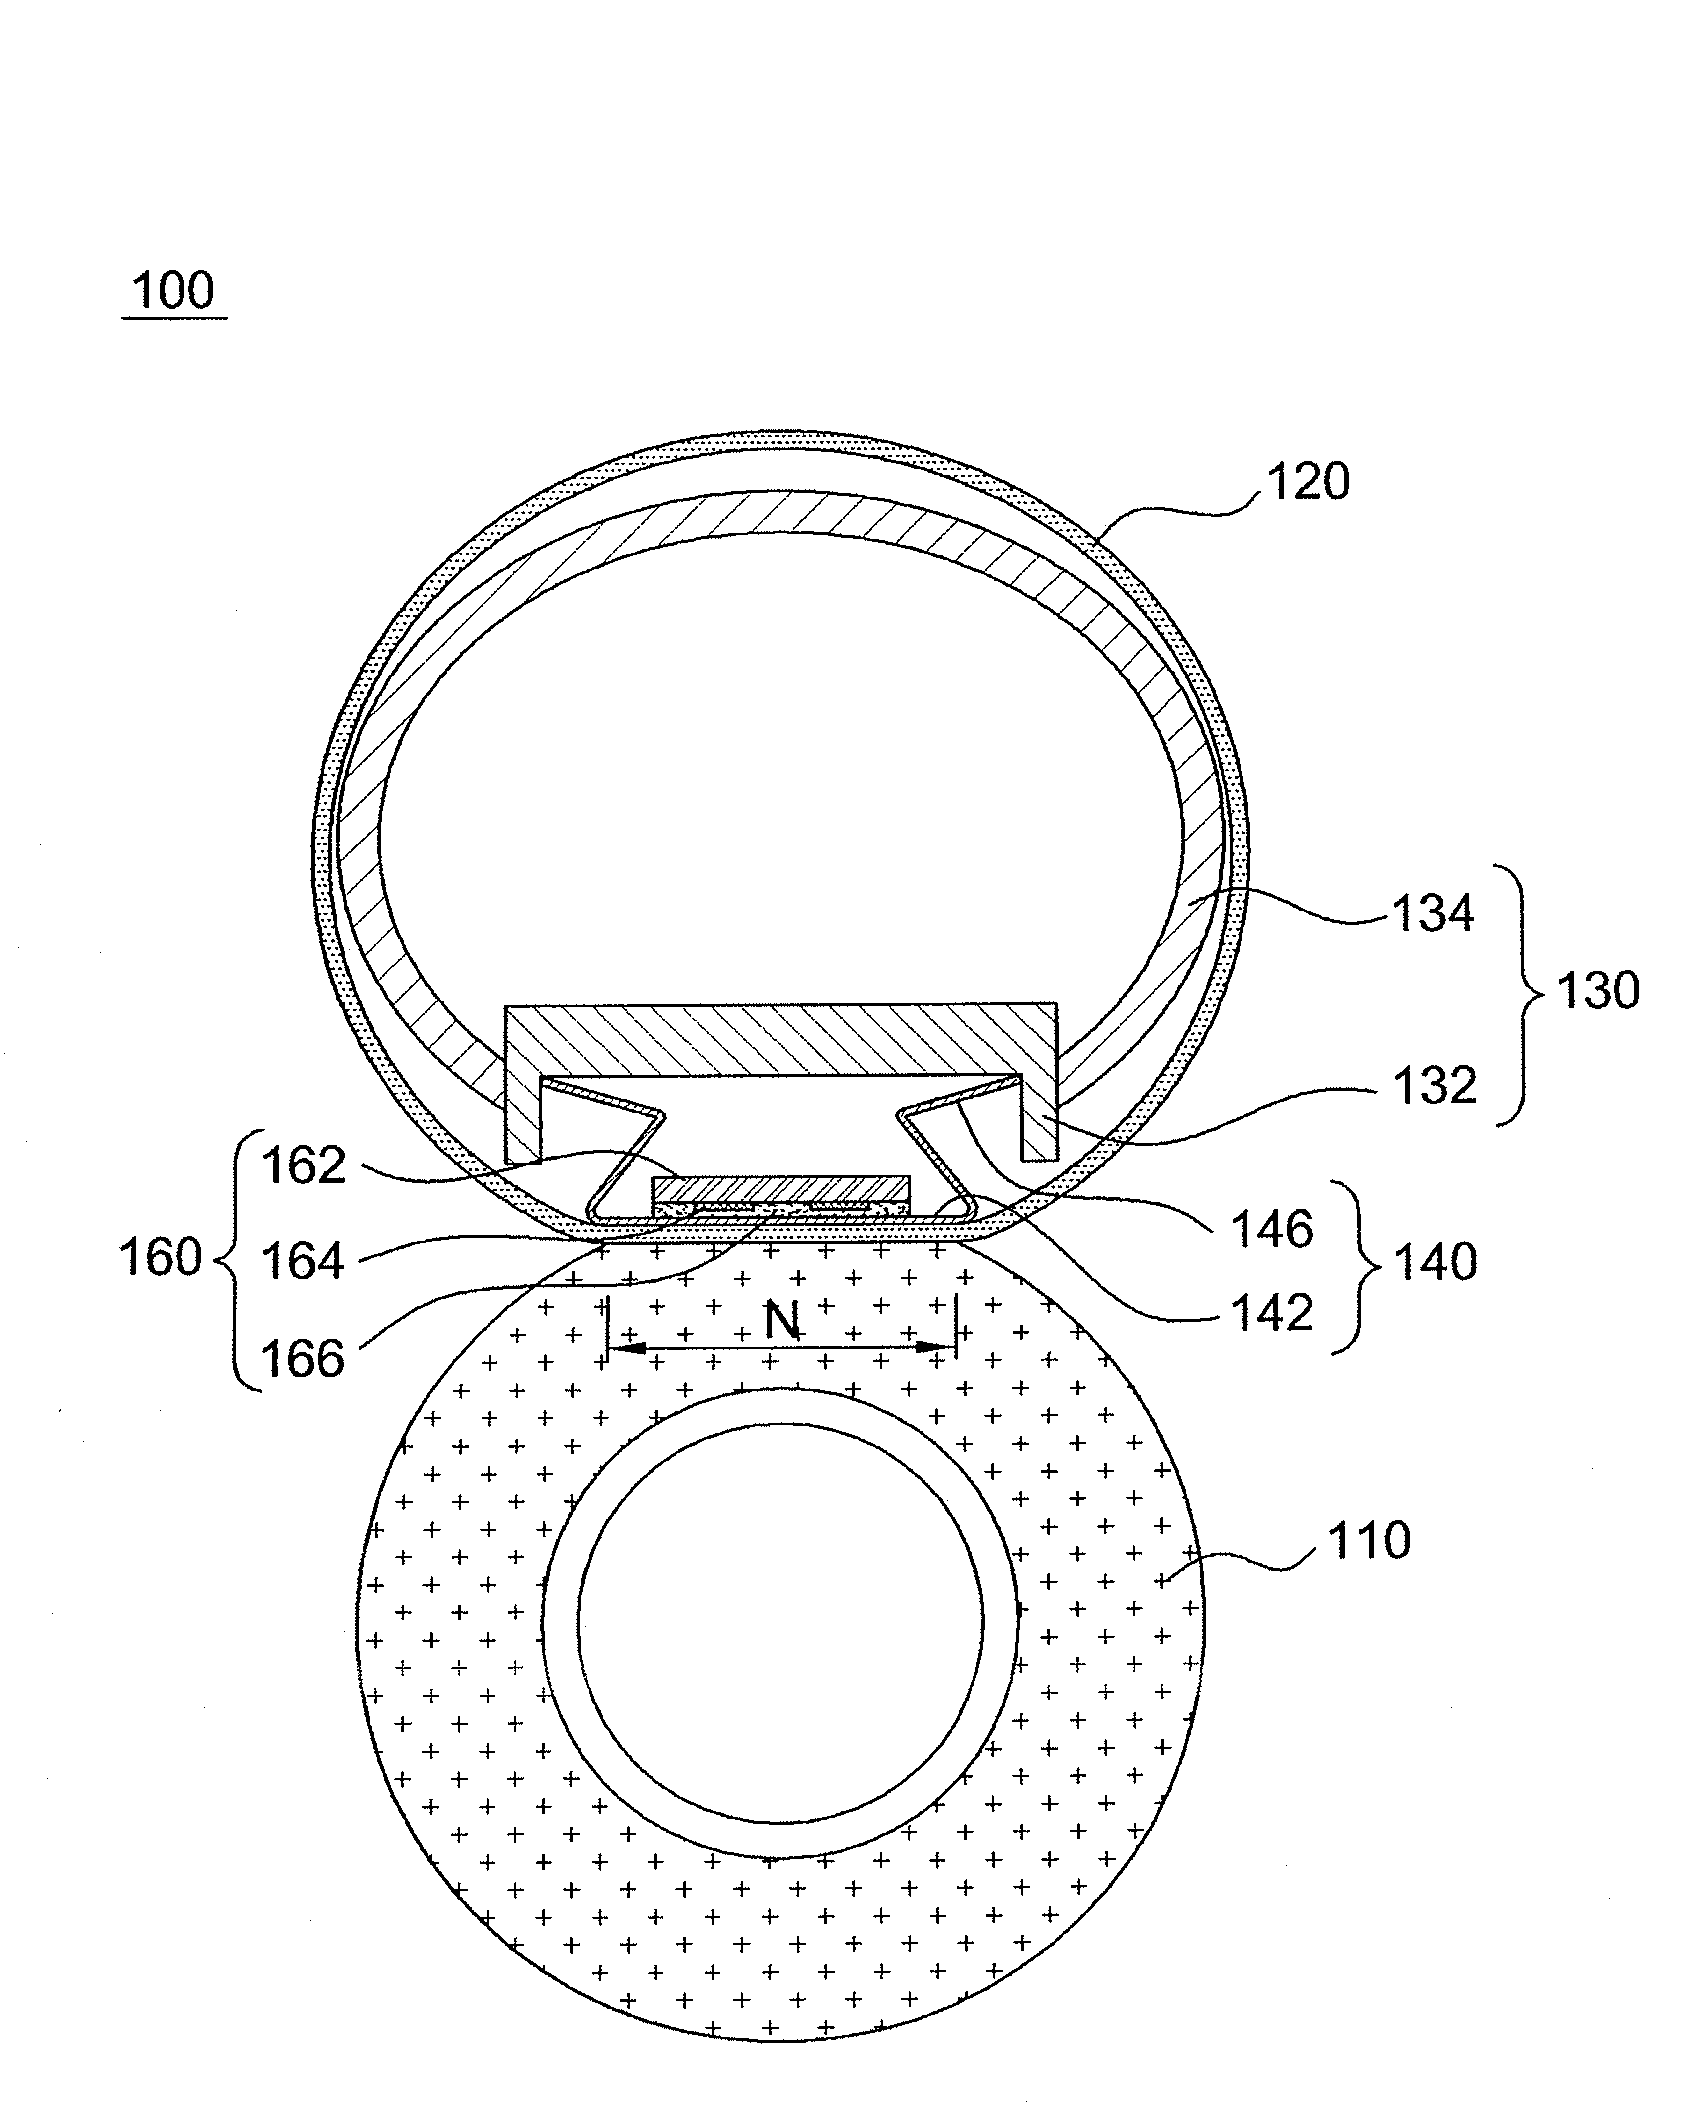 Apparatus and method of heating image on recordable material